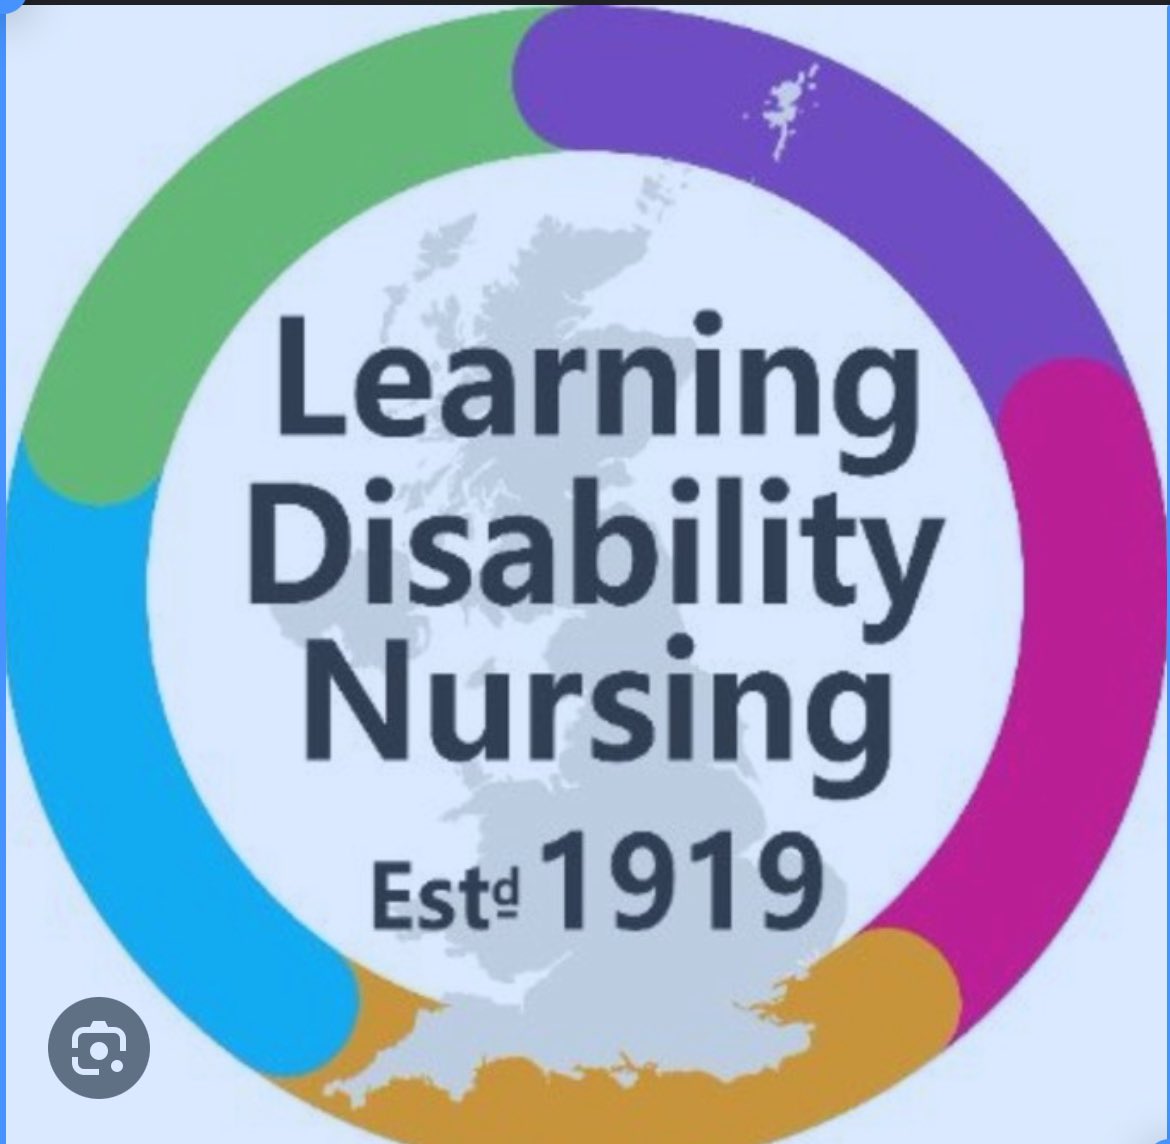 🌟 Proud to be a learning disability nurse! 💙 Supporting and empowering individuals with learning disabilities to live their best lives. Every day brings new challenges and triumphs, and I'm honored to be part of their journey. #LearningDisabilityNurse #PassionInPractice